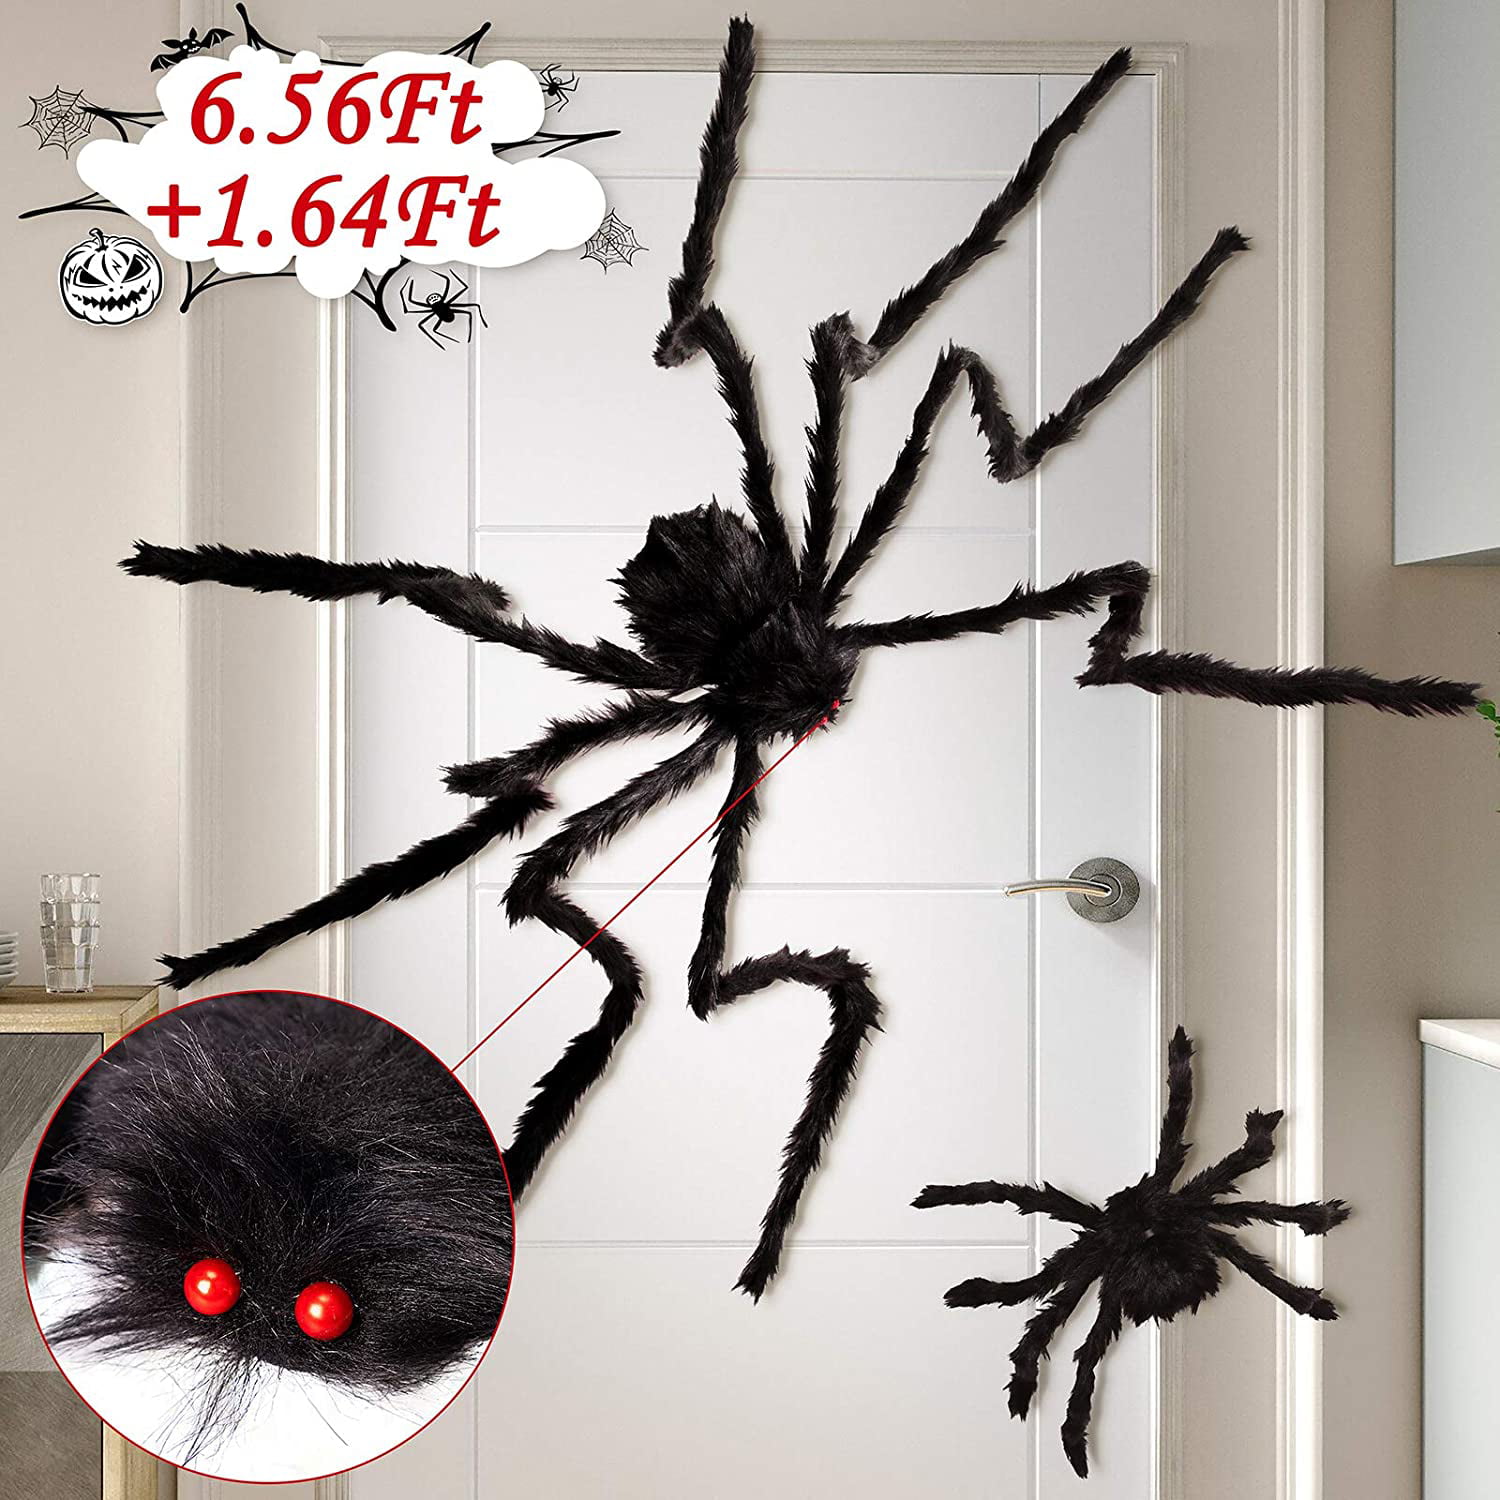 NEW 2017 Halloween Spider Giant Animals Decor Sound Control Simulate Black Party 